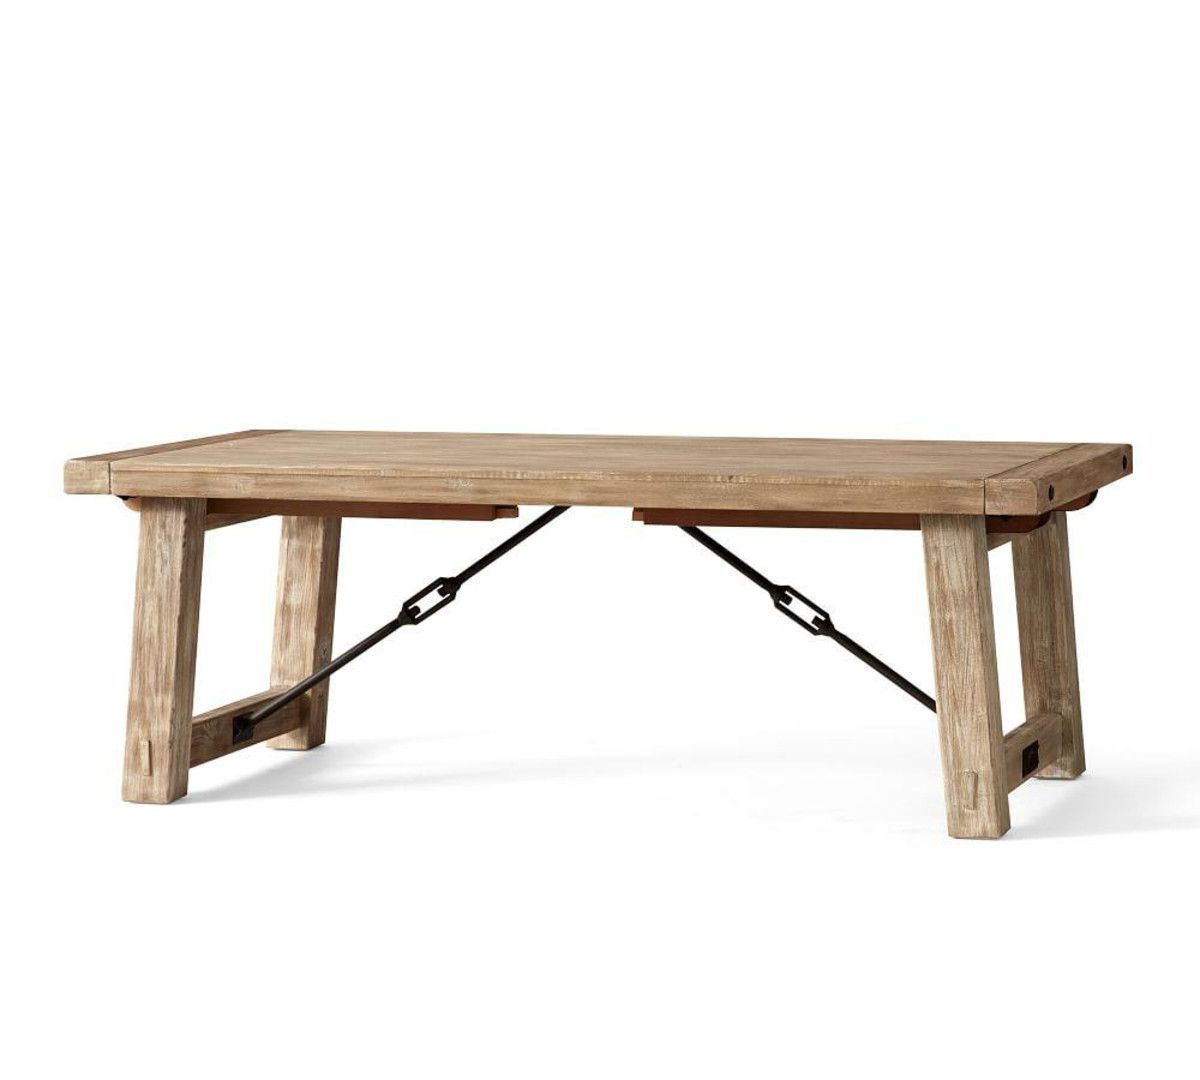 Current Gray Wash Benchwright Dining Tables For Benchwright Extending Dining Table, Seadrift (View 4 of 25)